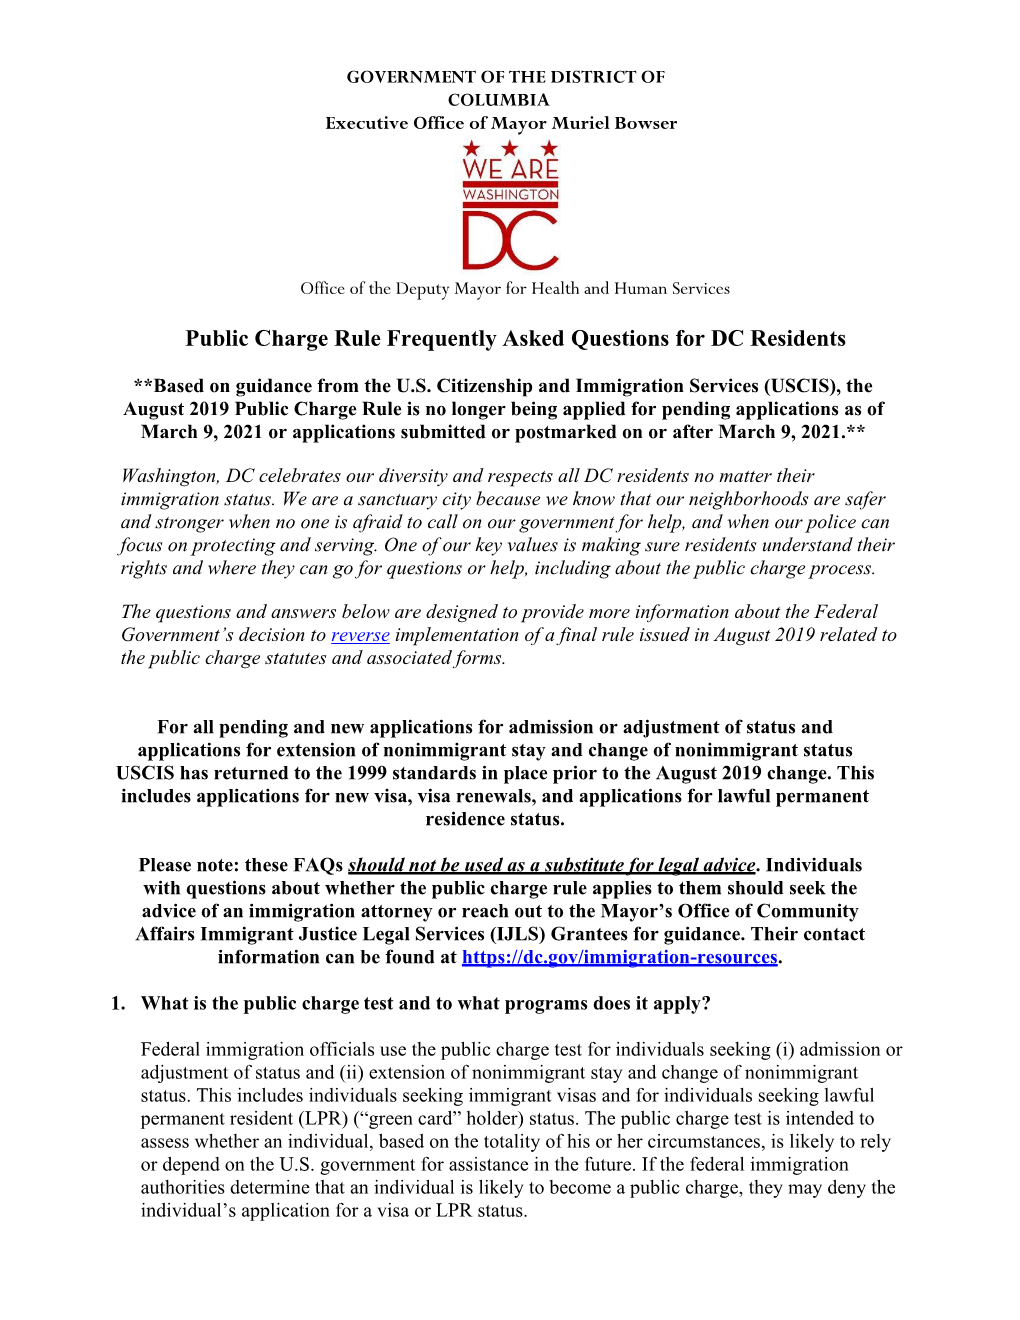 Public Charge Rule Frequently Asked Questions for DC Residents